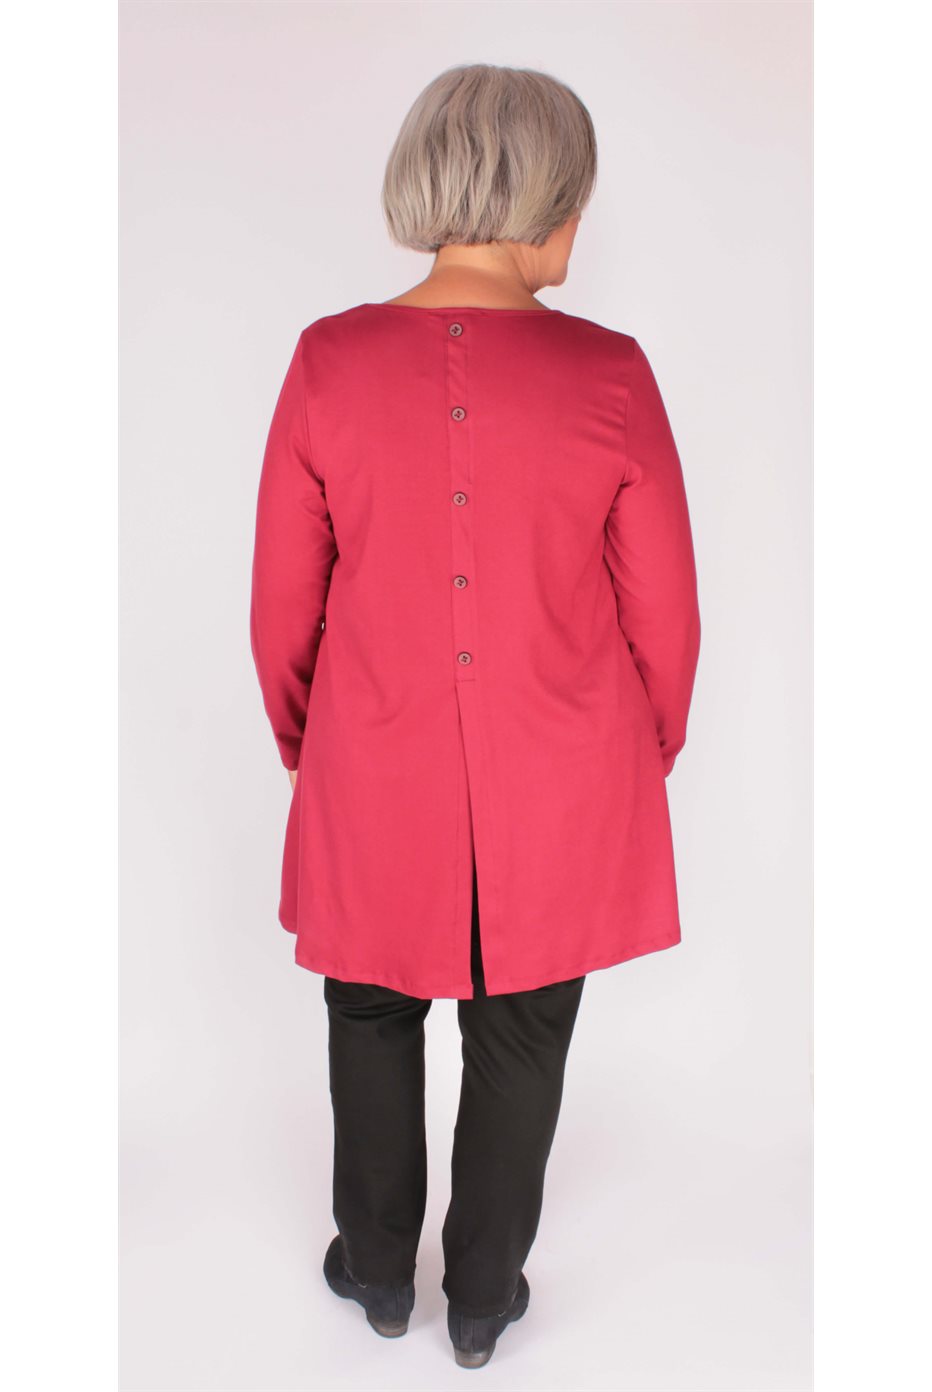 Red Tunic with Pocket